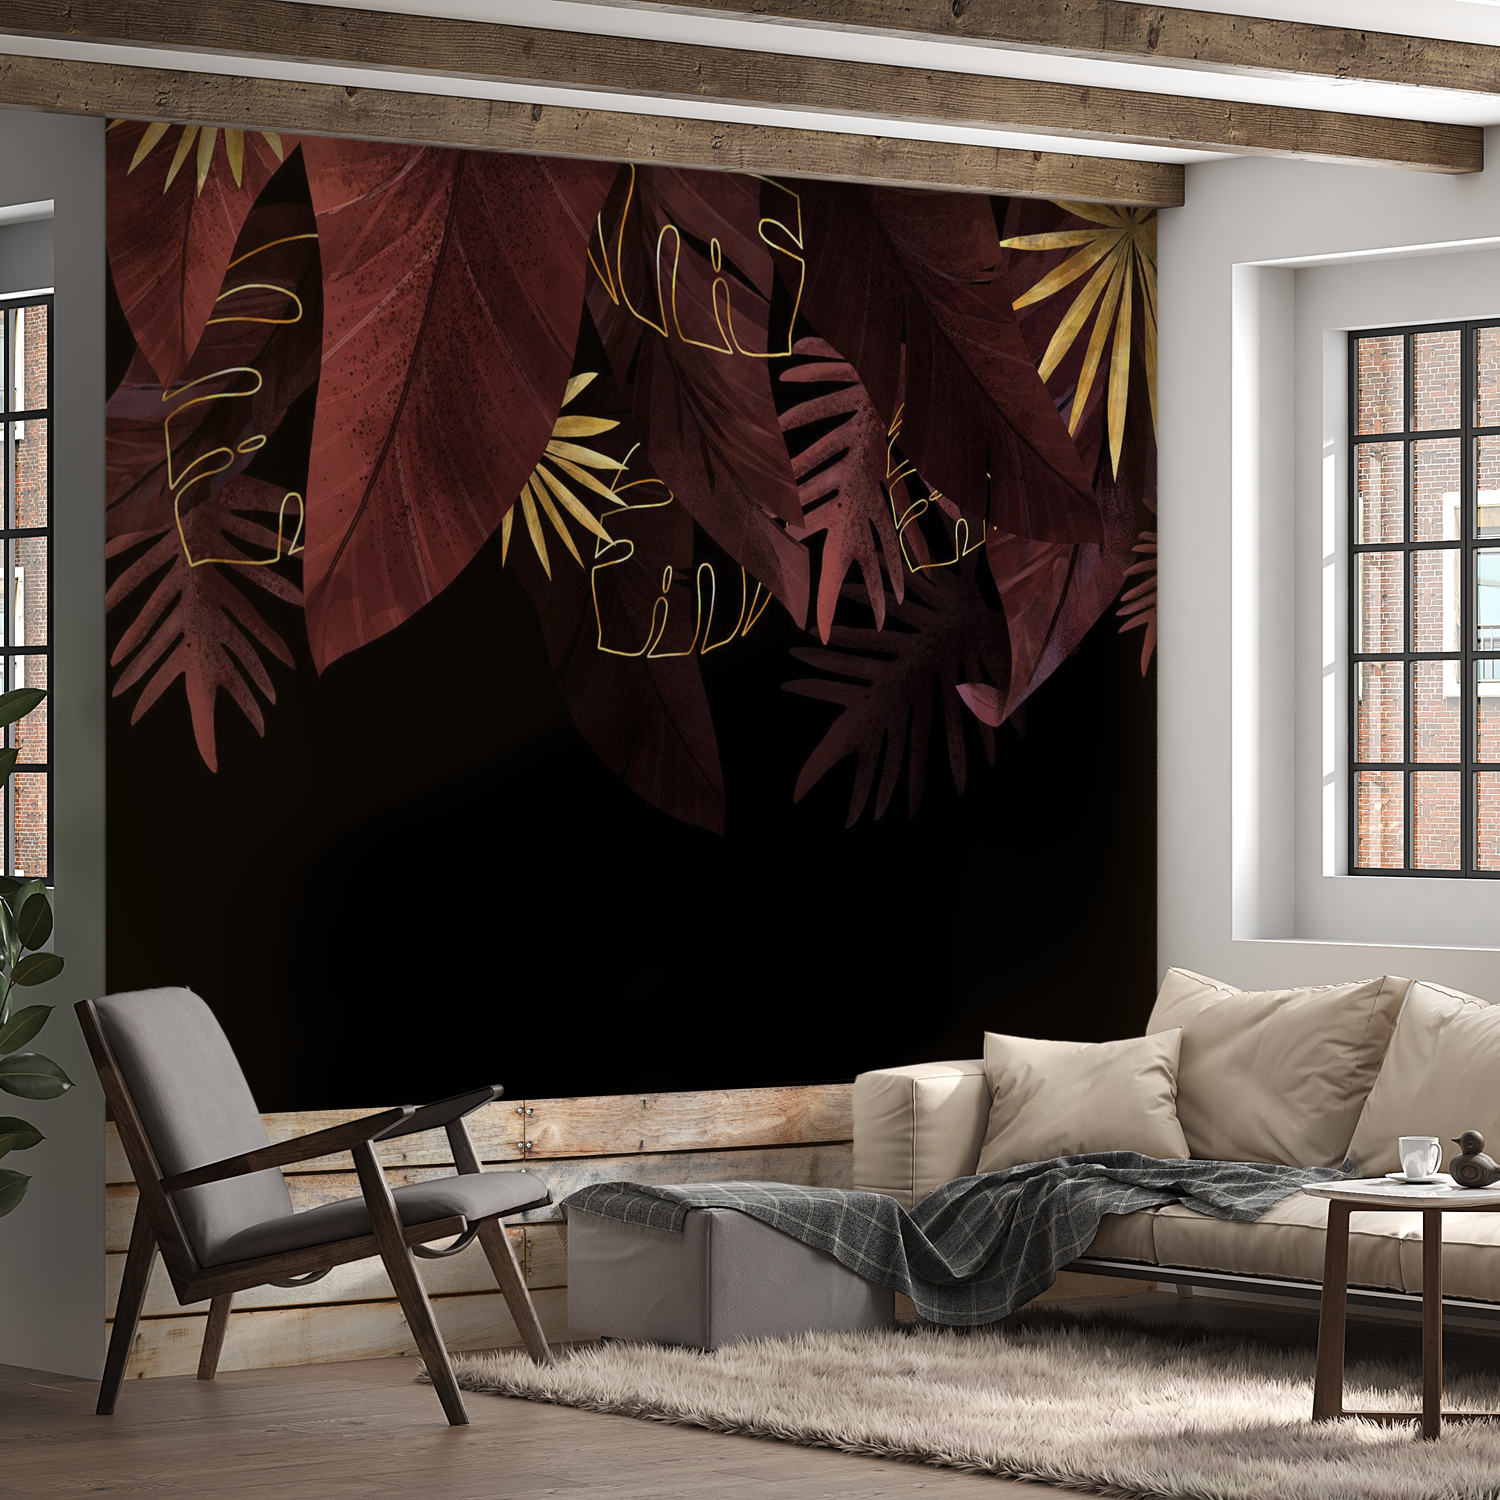 Peel & Stick Botanical Wall Mural - Red Jungle Golden Leaves - Removable Wallpaper 96"Wx68"H